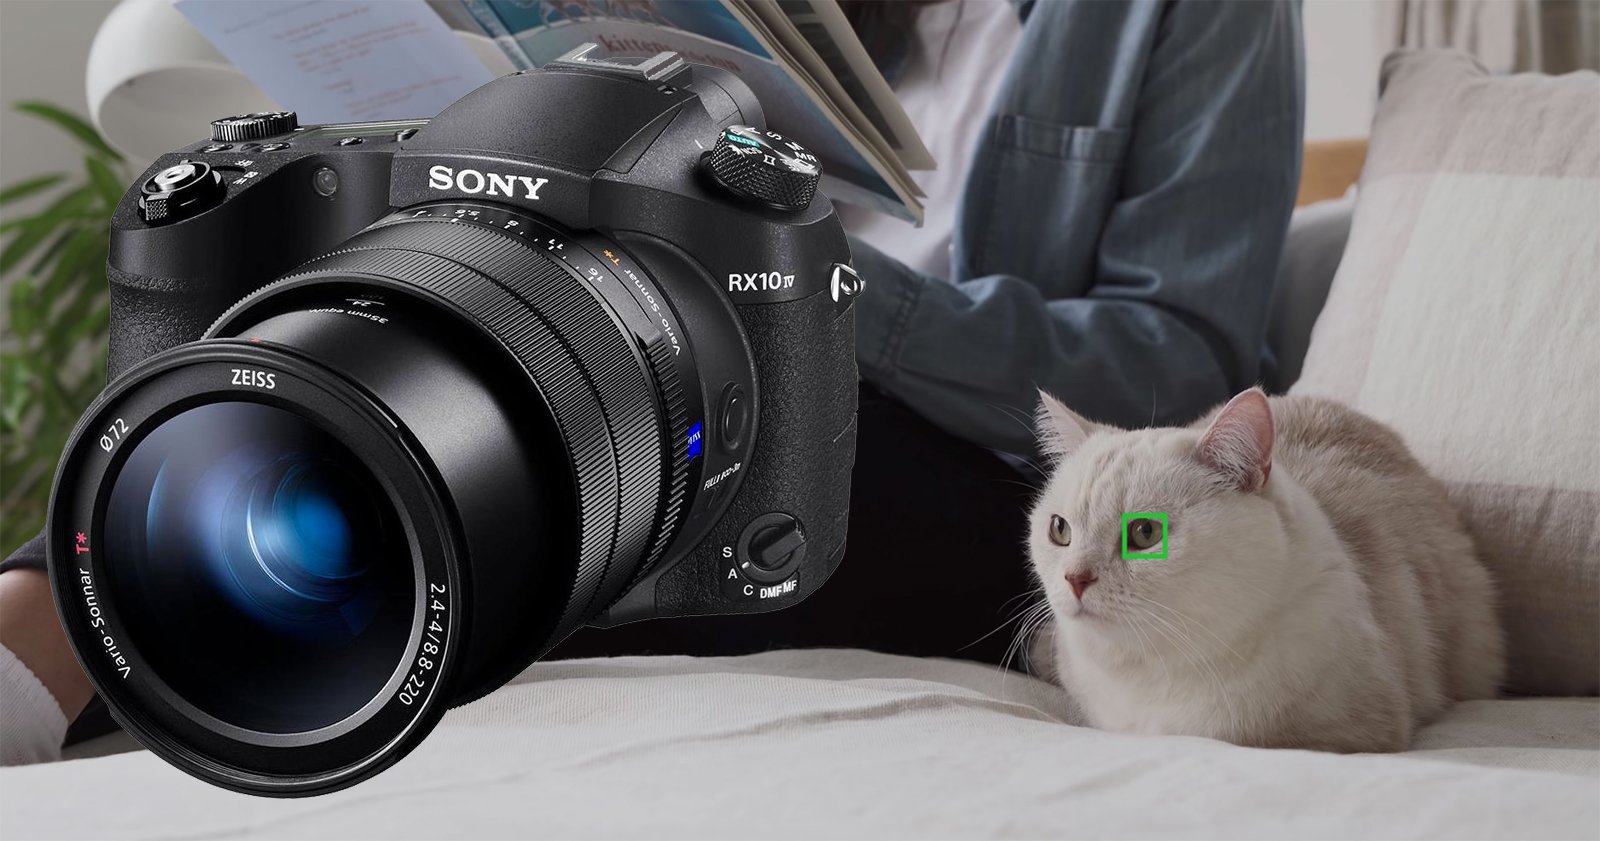  sony eye animal rx10 real-time 